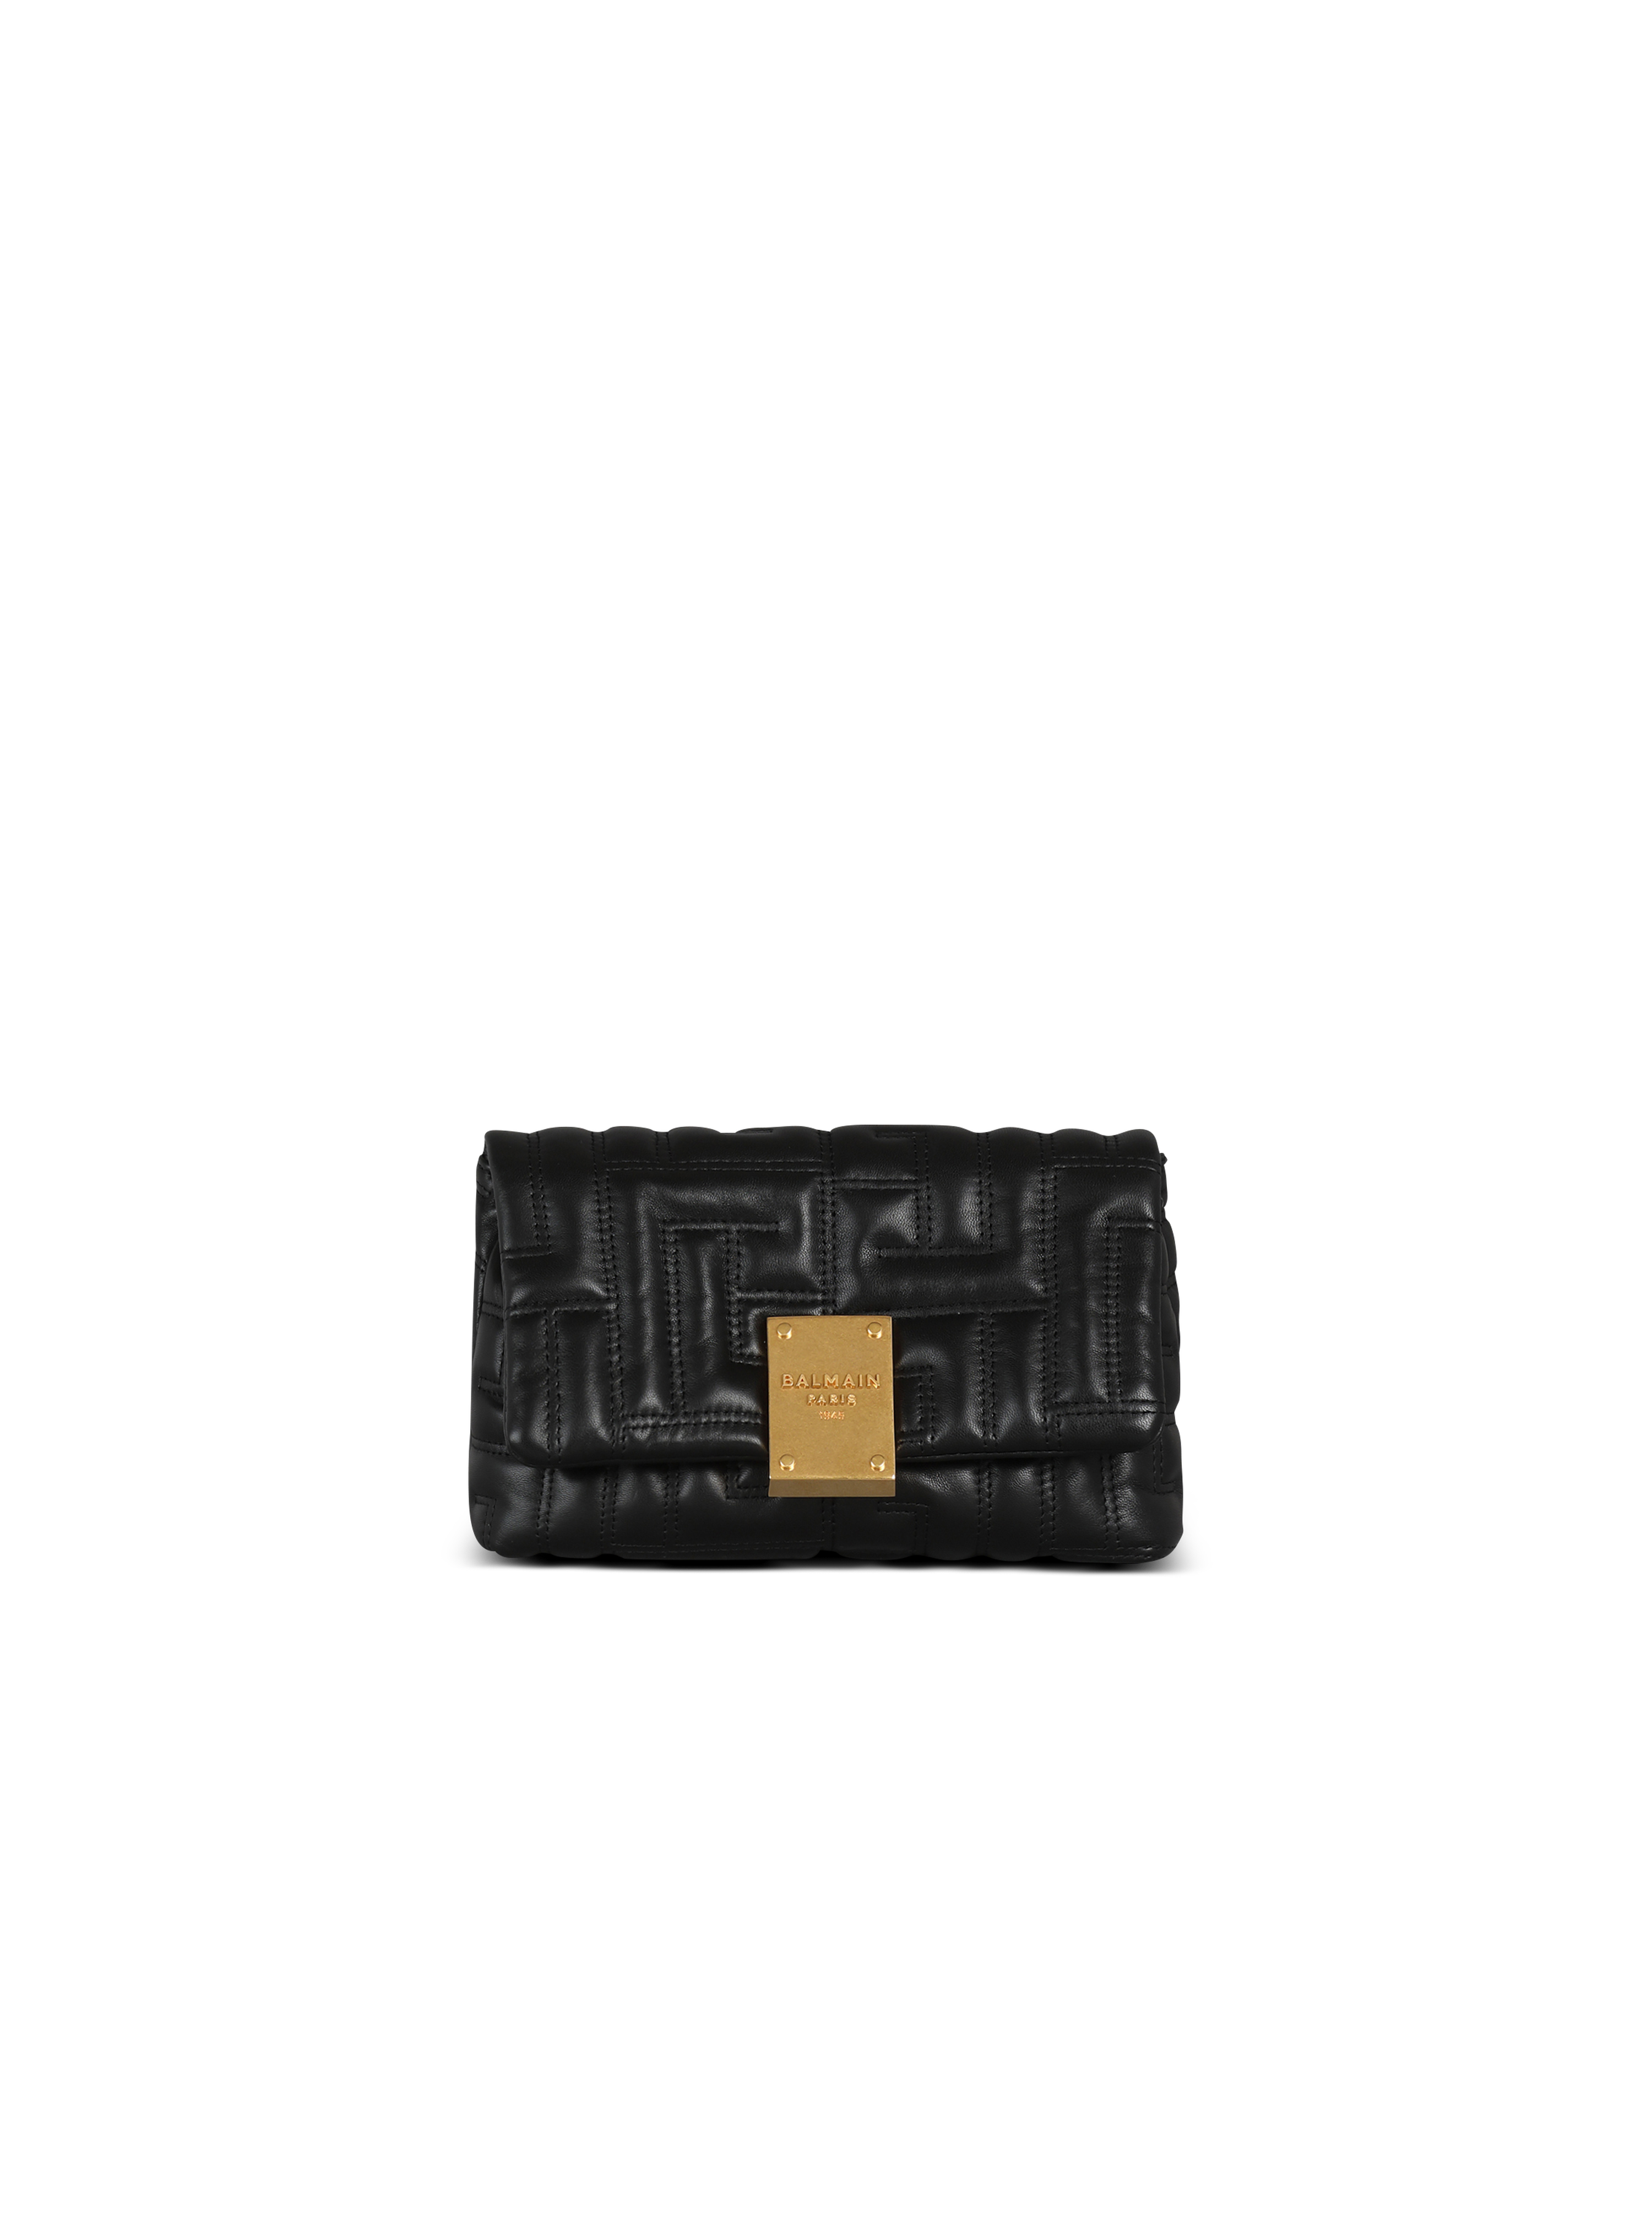 1945 Soft mini bag in quilted leather, black